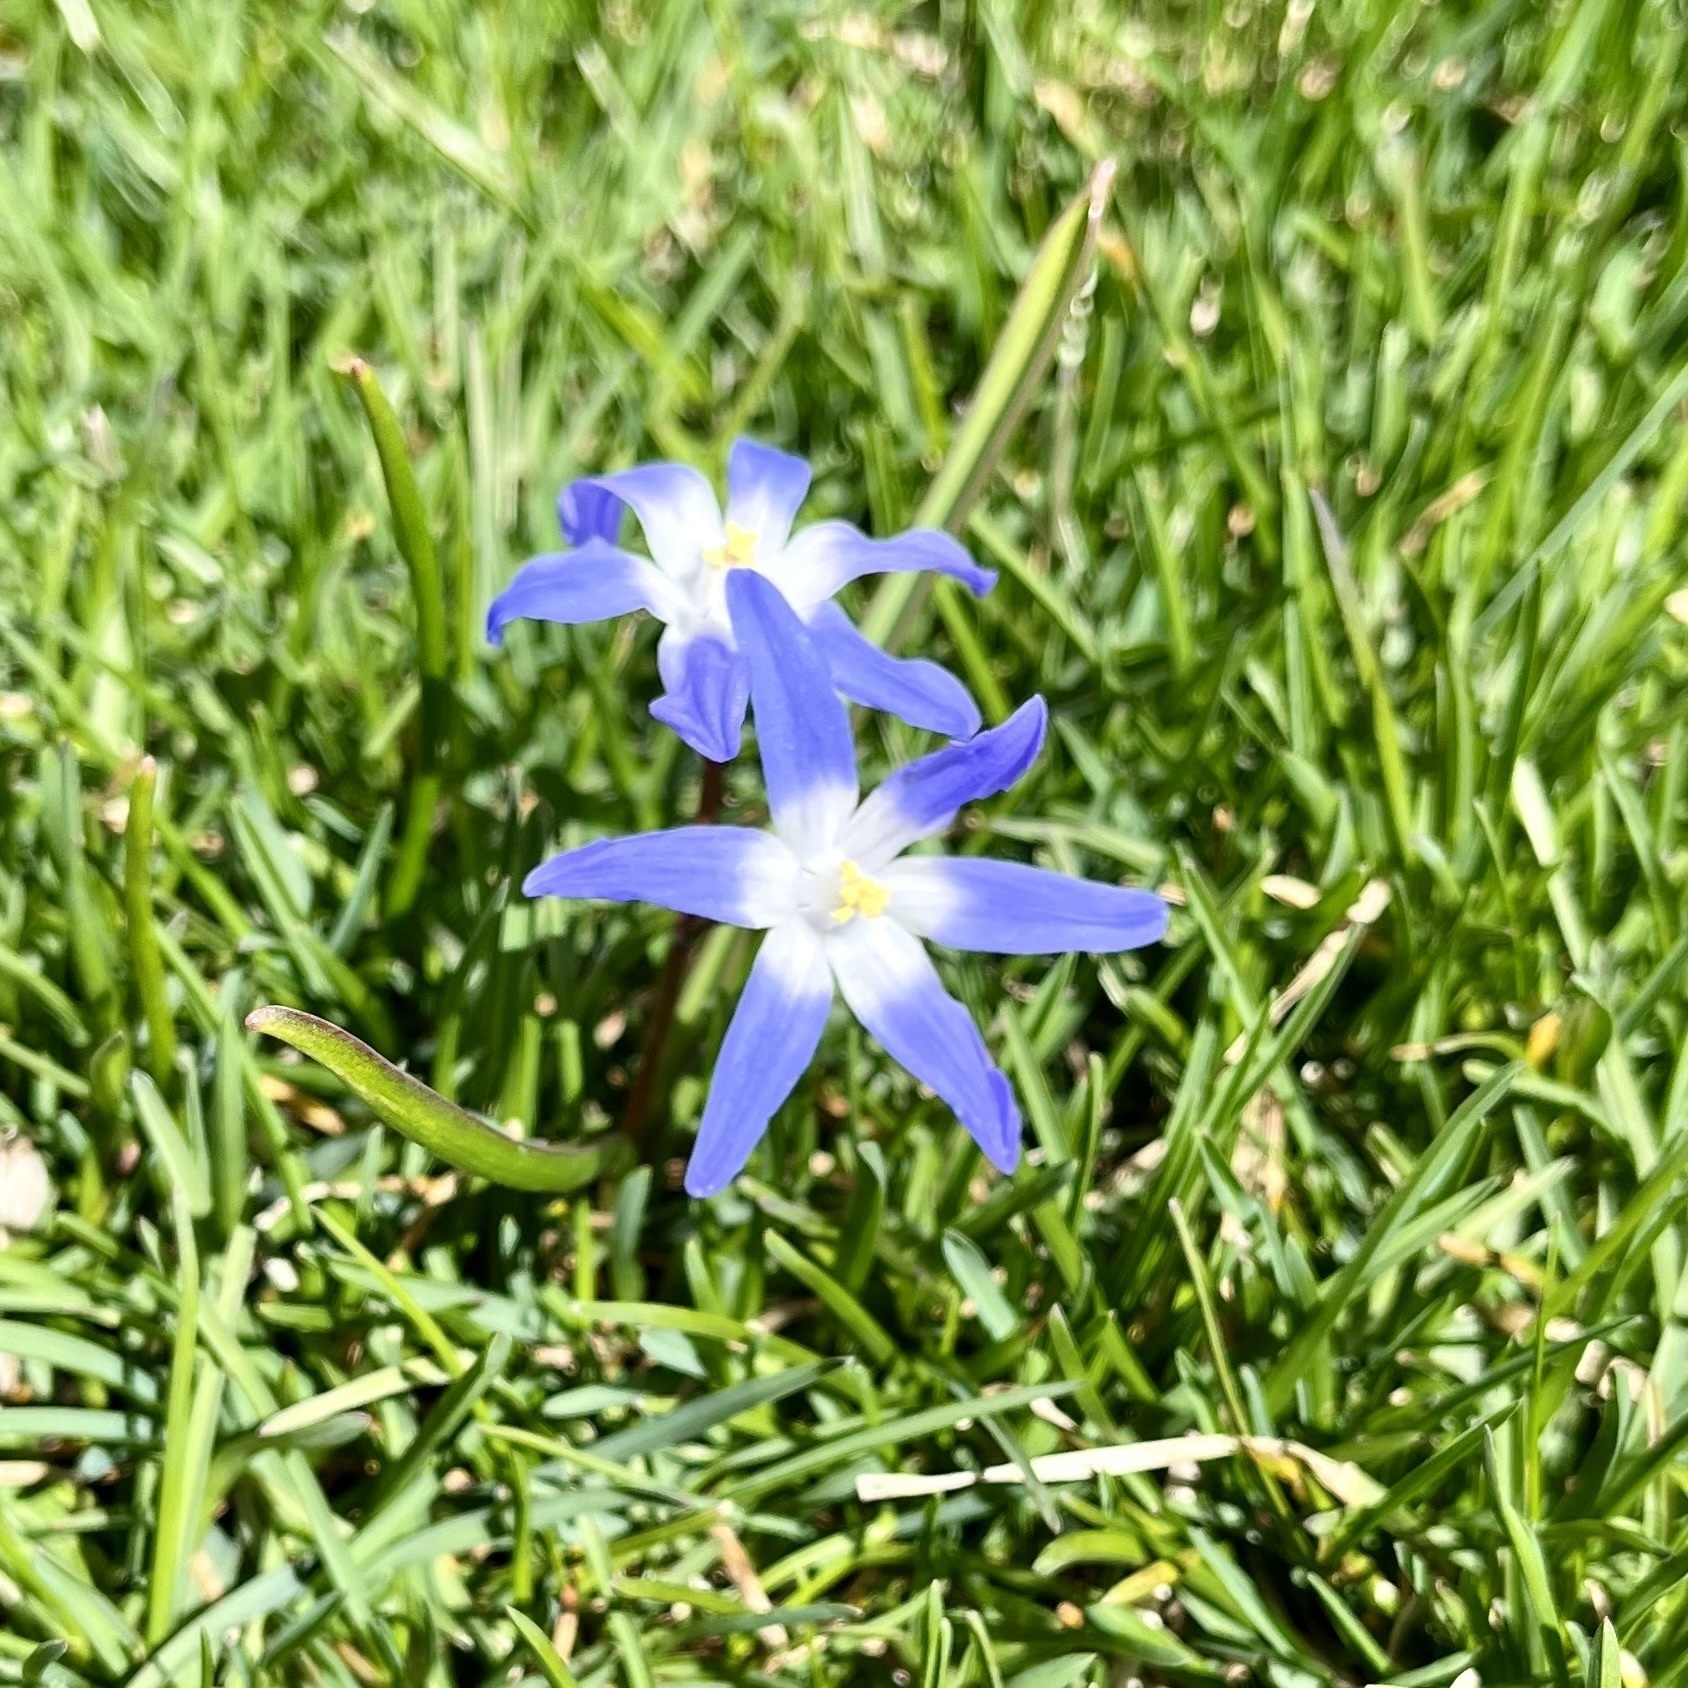 A vibrant blue flower with a central white and yellow core stands amidst green grass.